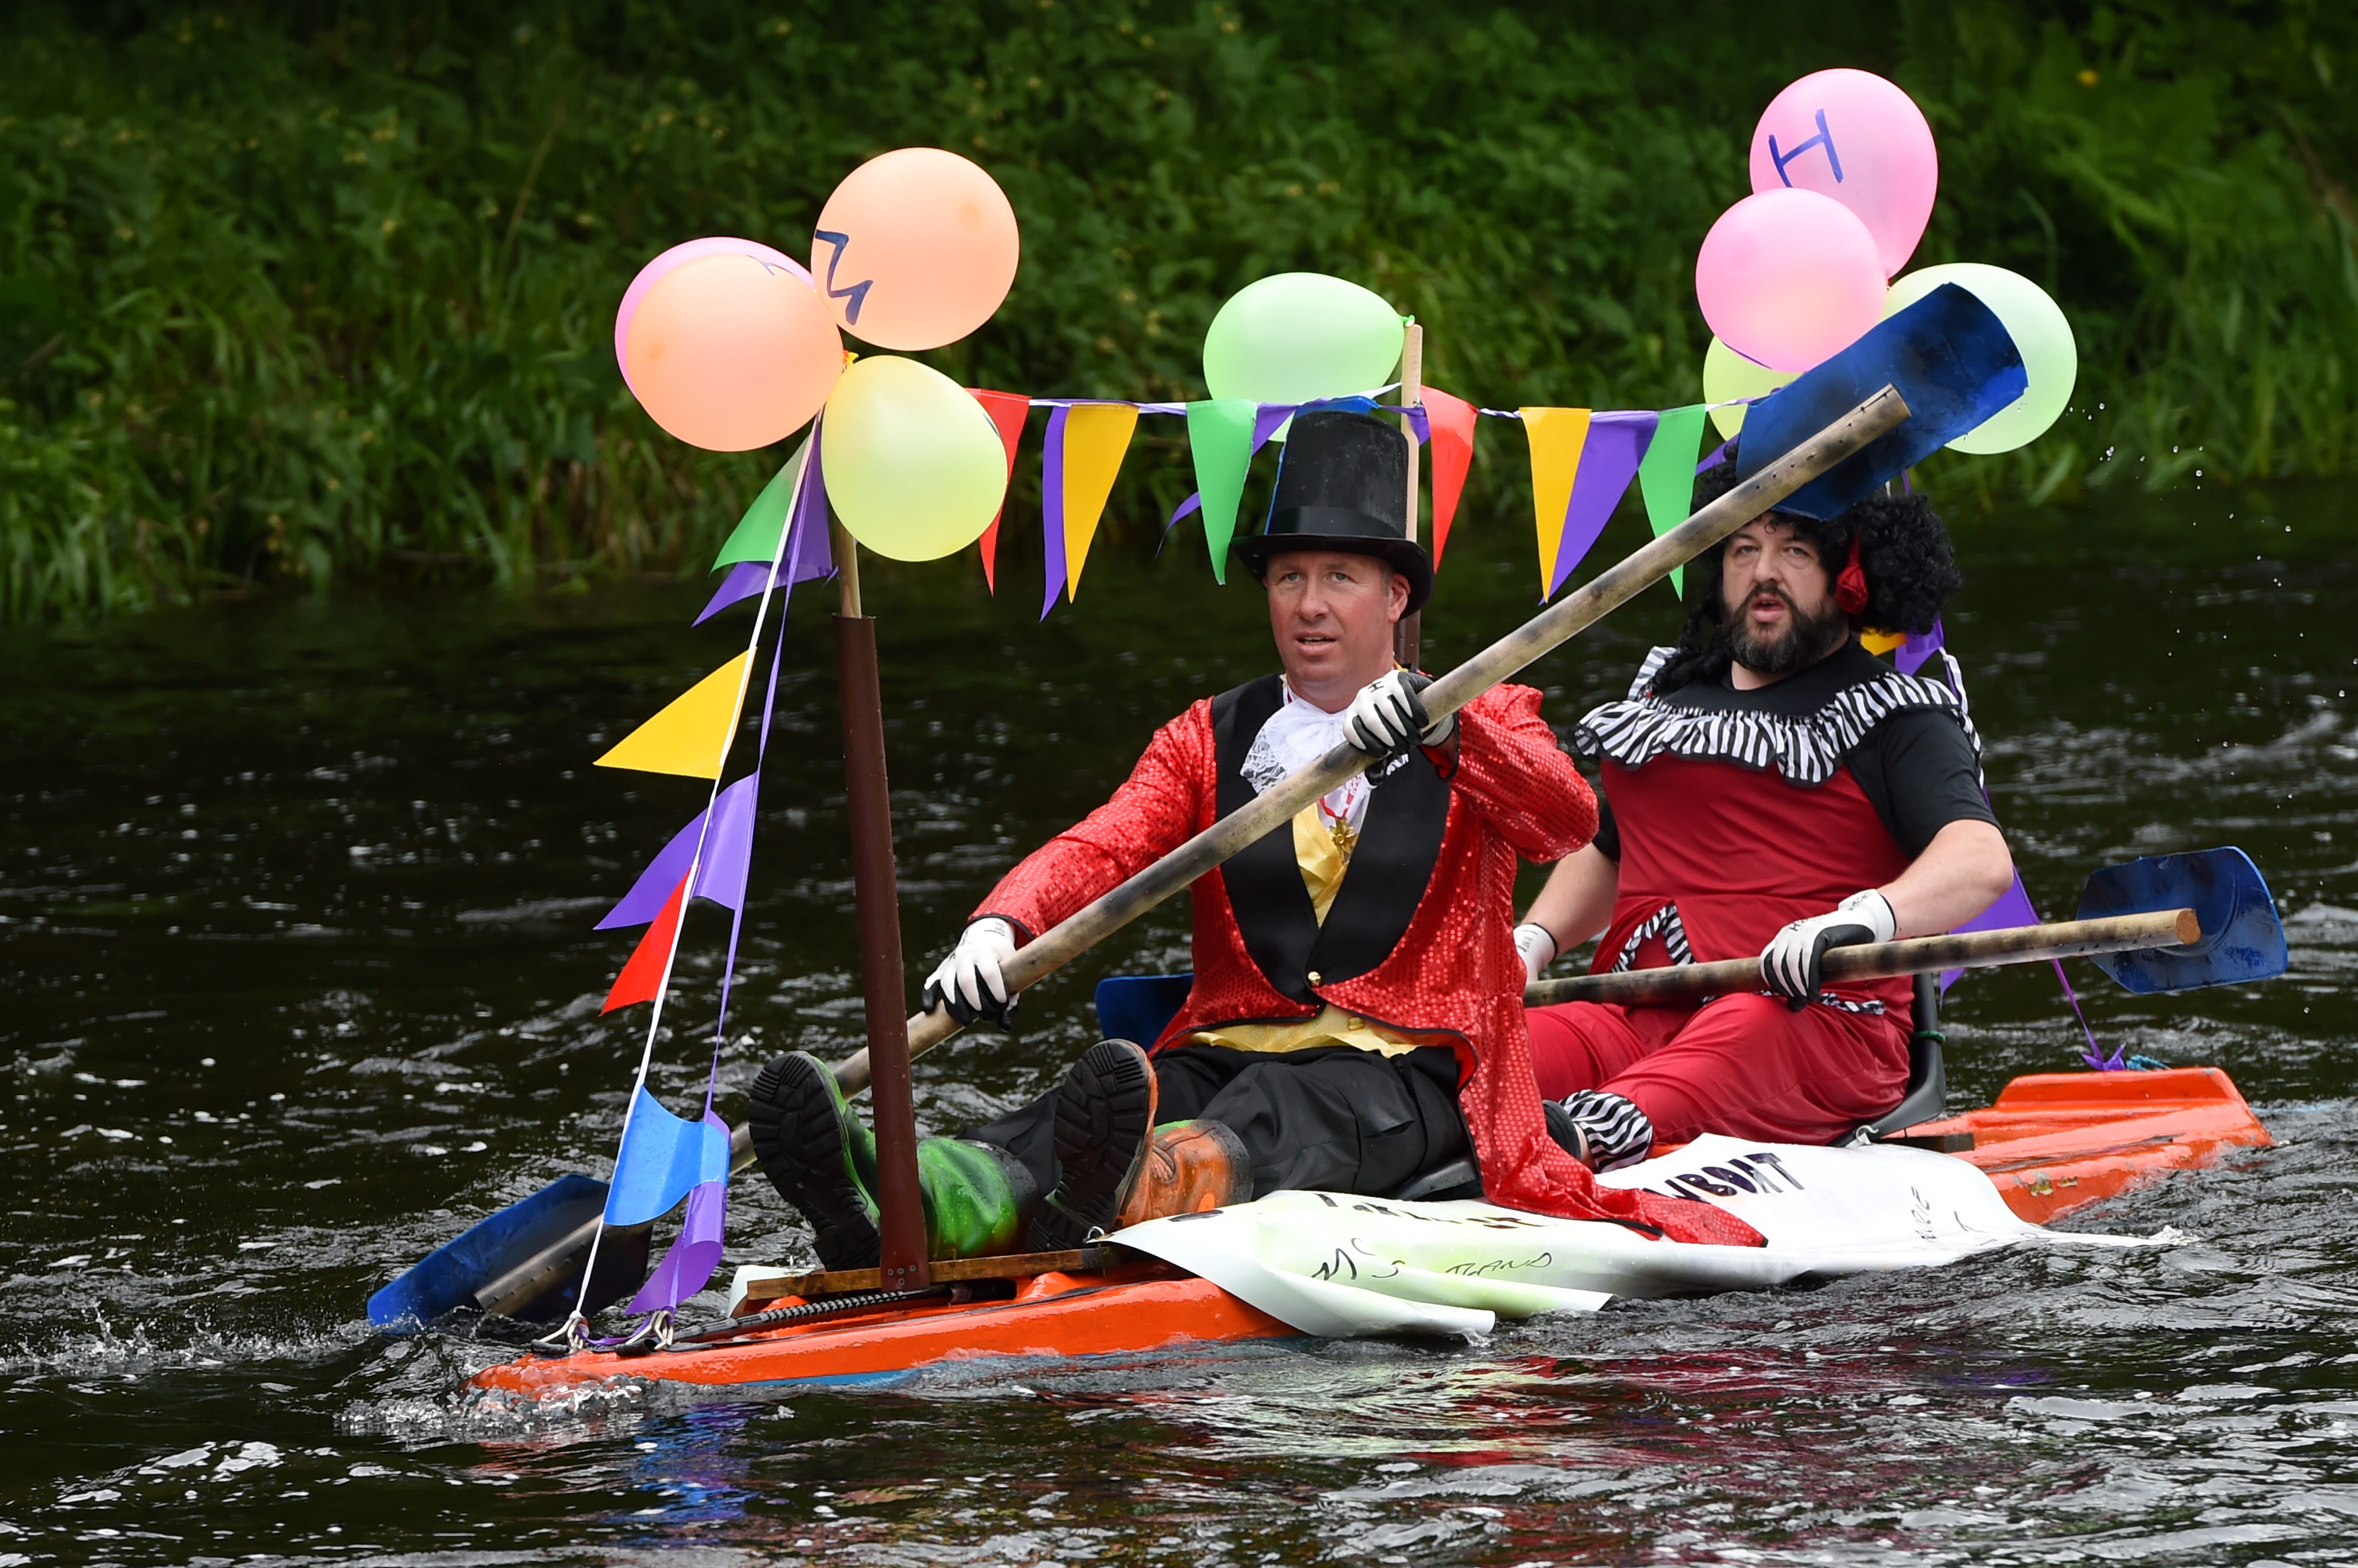 Hundreds of people came out to watch the Inverurie Raft Race.